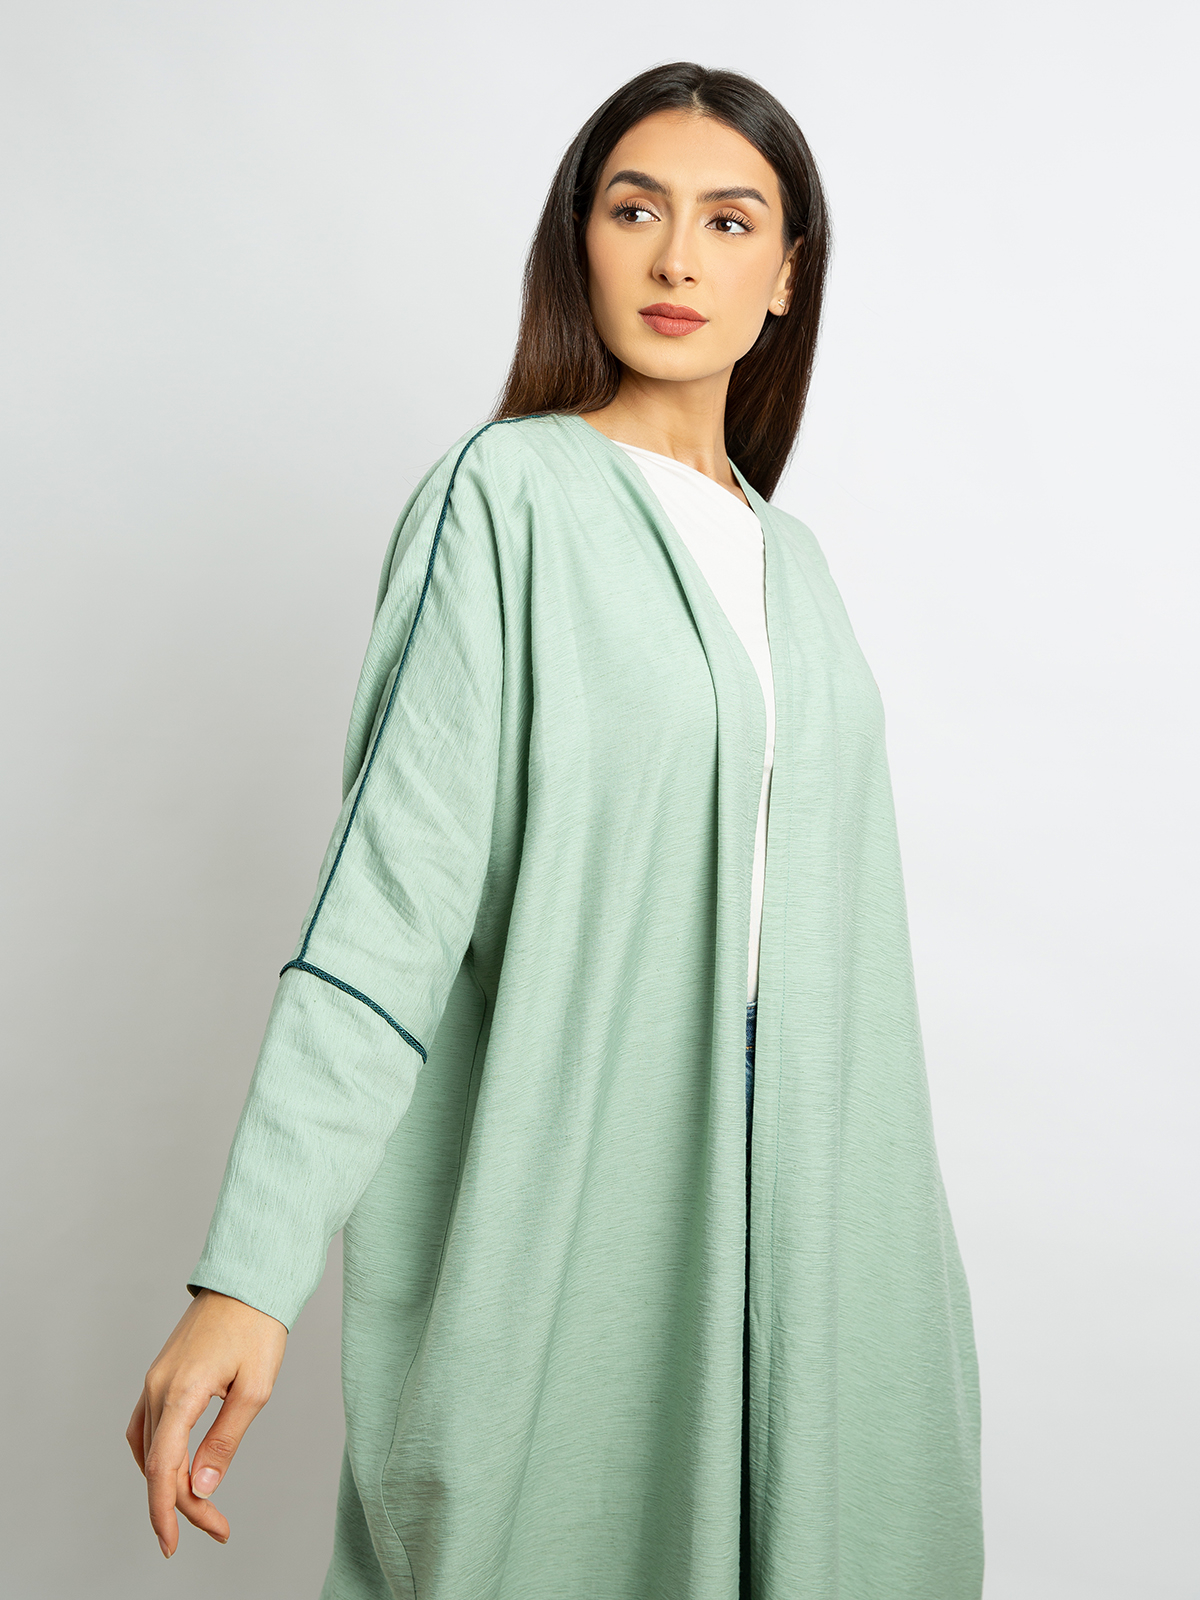 Open long half bisht abaya light green color with Qitan in linen-feel fabric for work and events by kaafmeem clothing